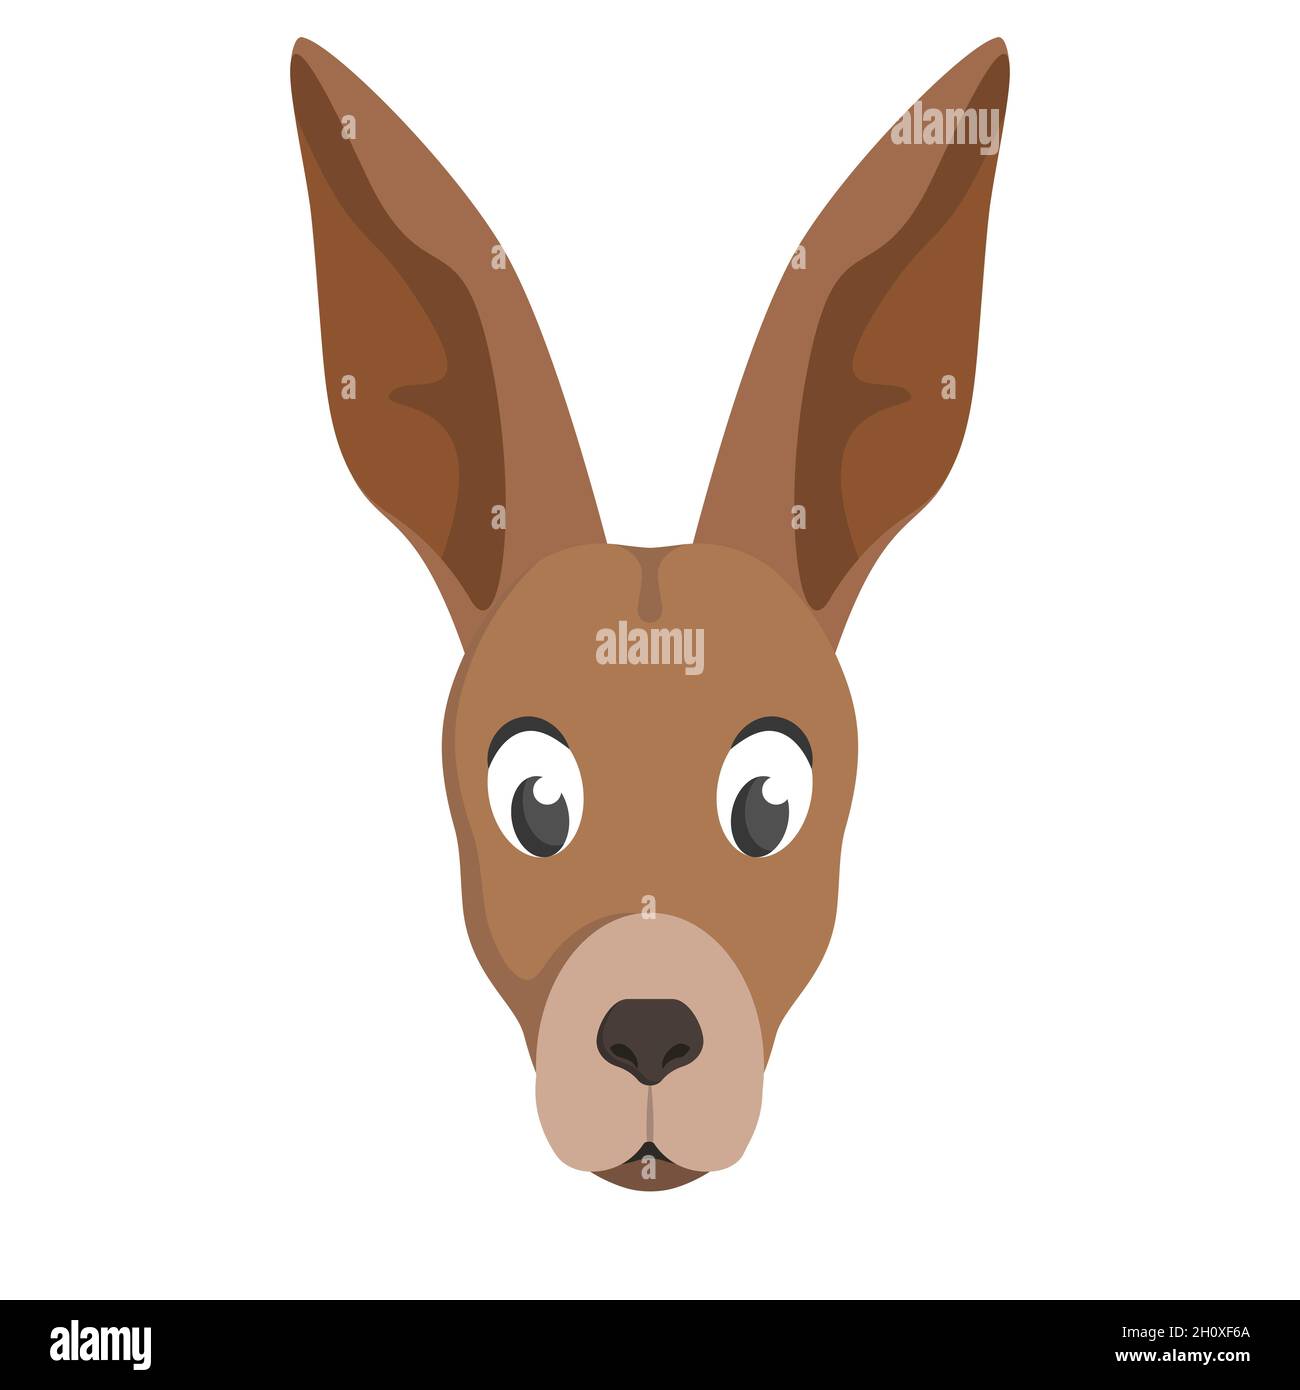 Kangaroo face Cut Out Stock Images & Pictures - Alamy